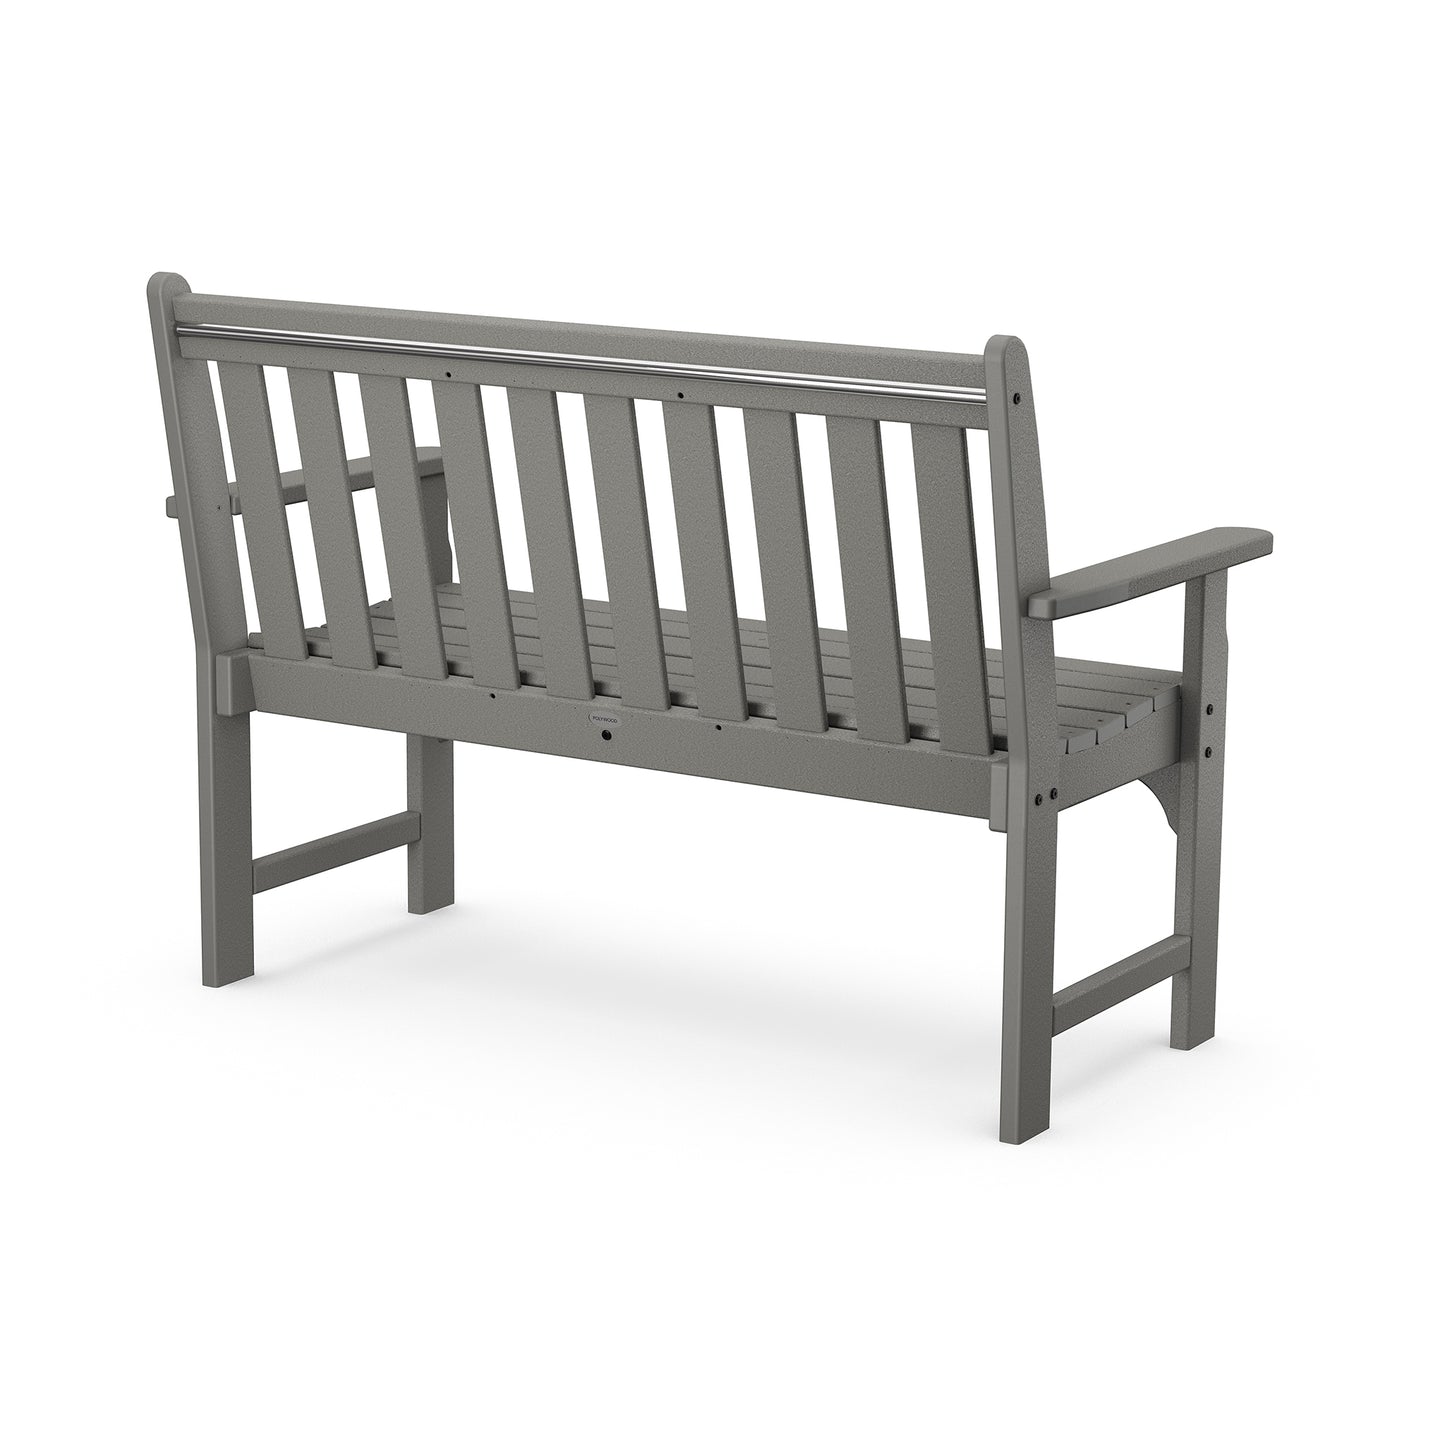 A three-dimensional digital rendering of a simple, grey POLYWOOD® Vineyard 48" Garden Bench with a slatted backrest and seat, armrests on both sides, isolated on a white background.